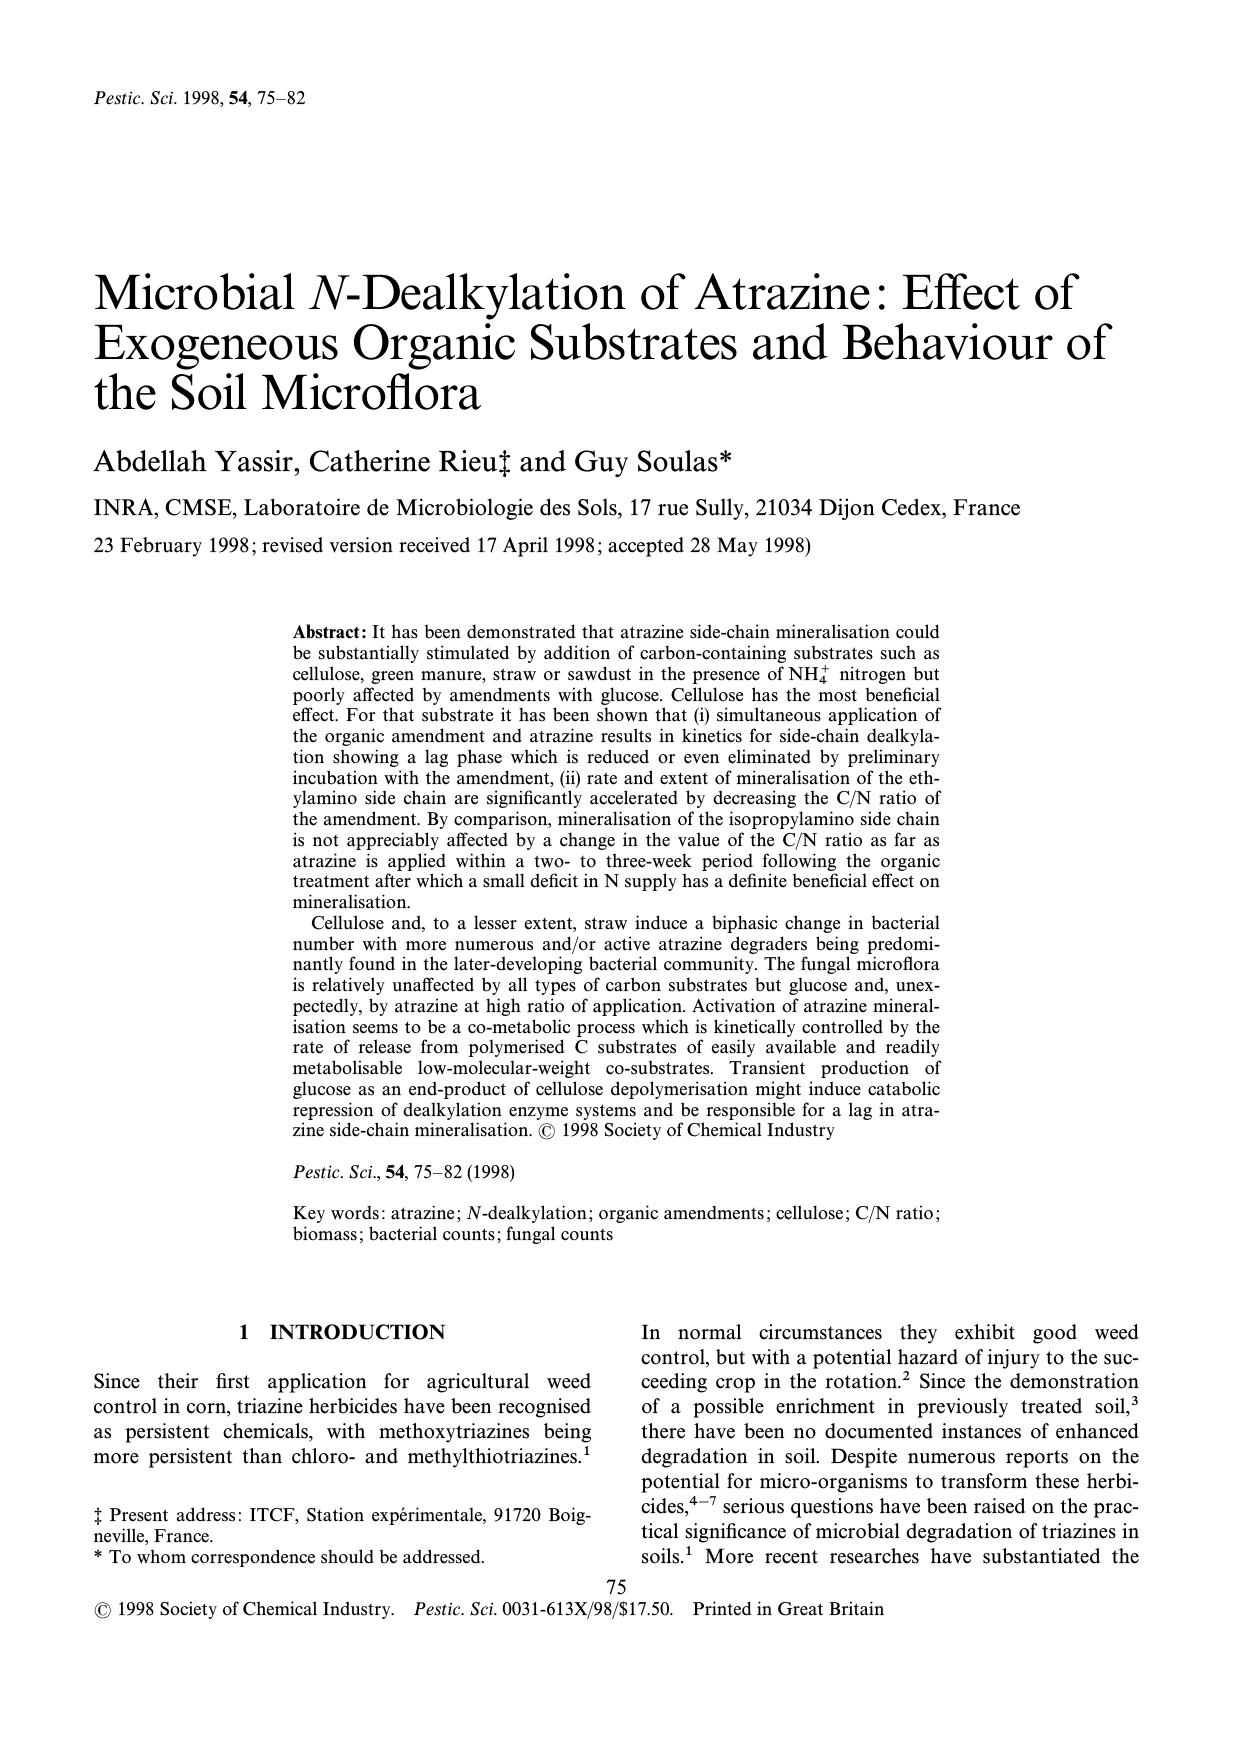 Microbial Ndealkylation of atrazine: Effect of exogeneous organic substrates and behaviour of the soil microflora by Yassir Rieu Soulas